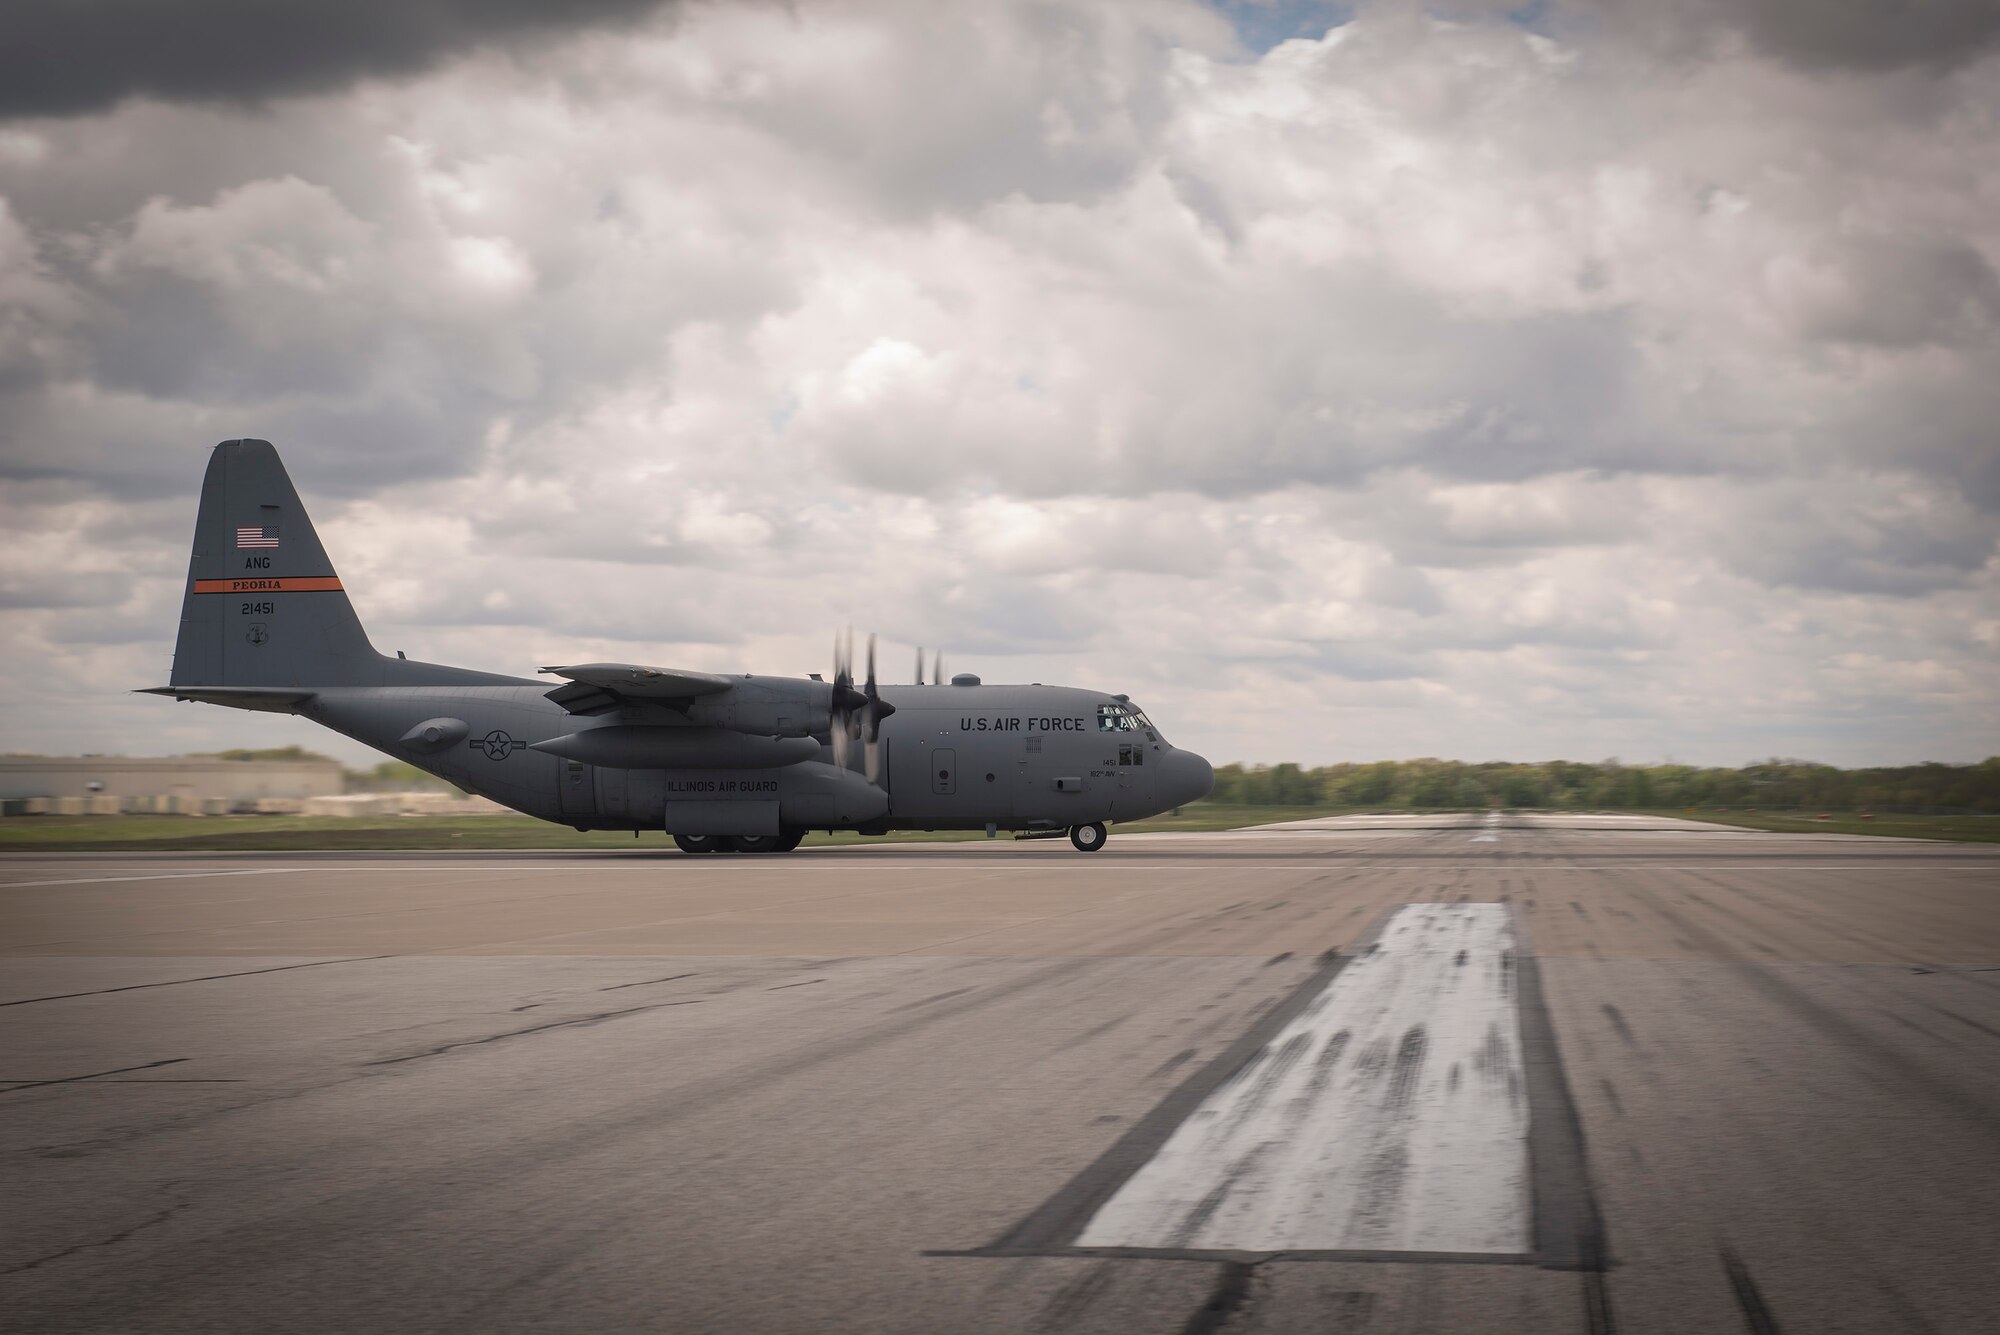 A C-130H Hercules aircraft assigned to the 182nd Airlift Wing, Illinois Air National Guard, takes off in a four-plane formation training during drill weekend in Peoria, Ill., May 6, 2017. The C-130 is capable of airdropping troops and equipment into hostile areas while operating in inclement terrain. (U.S. Air National Guard photo by Tech. Sgt. Lealan Buehrer)